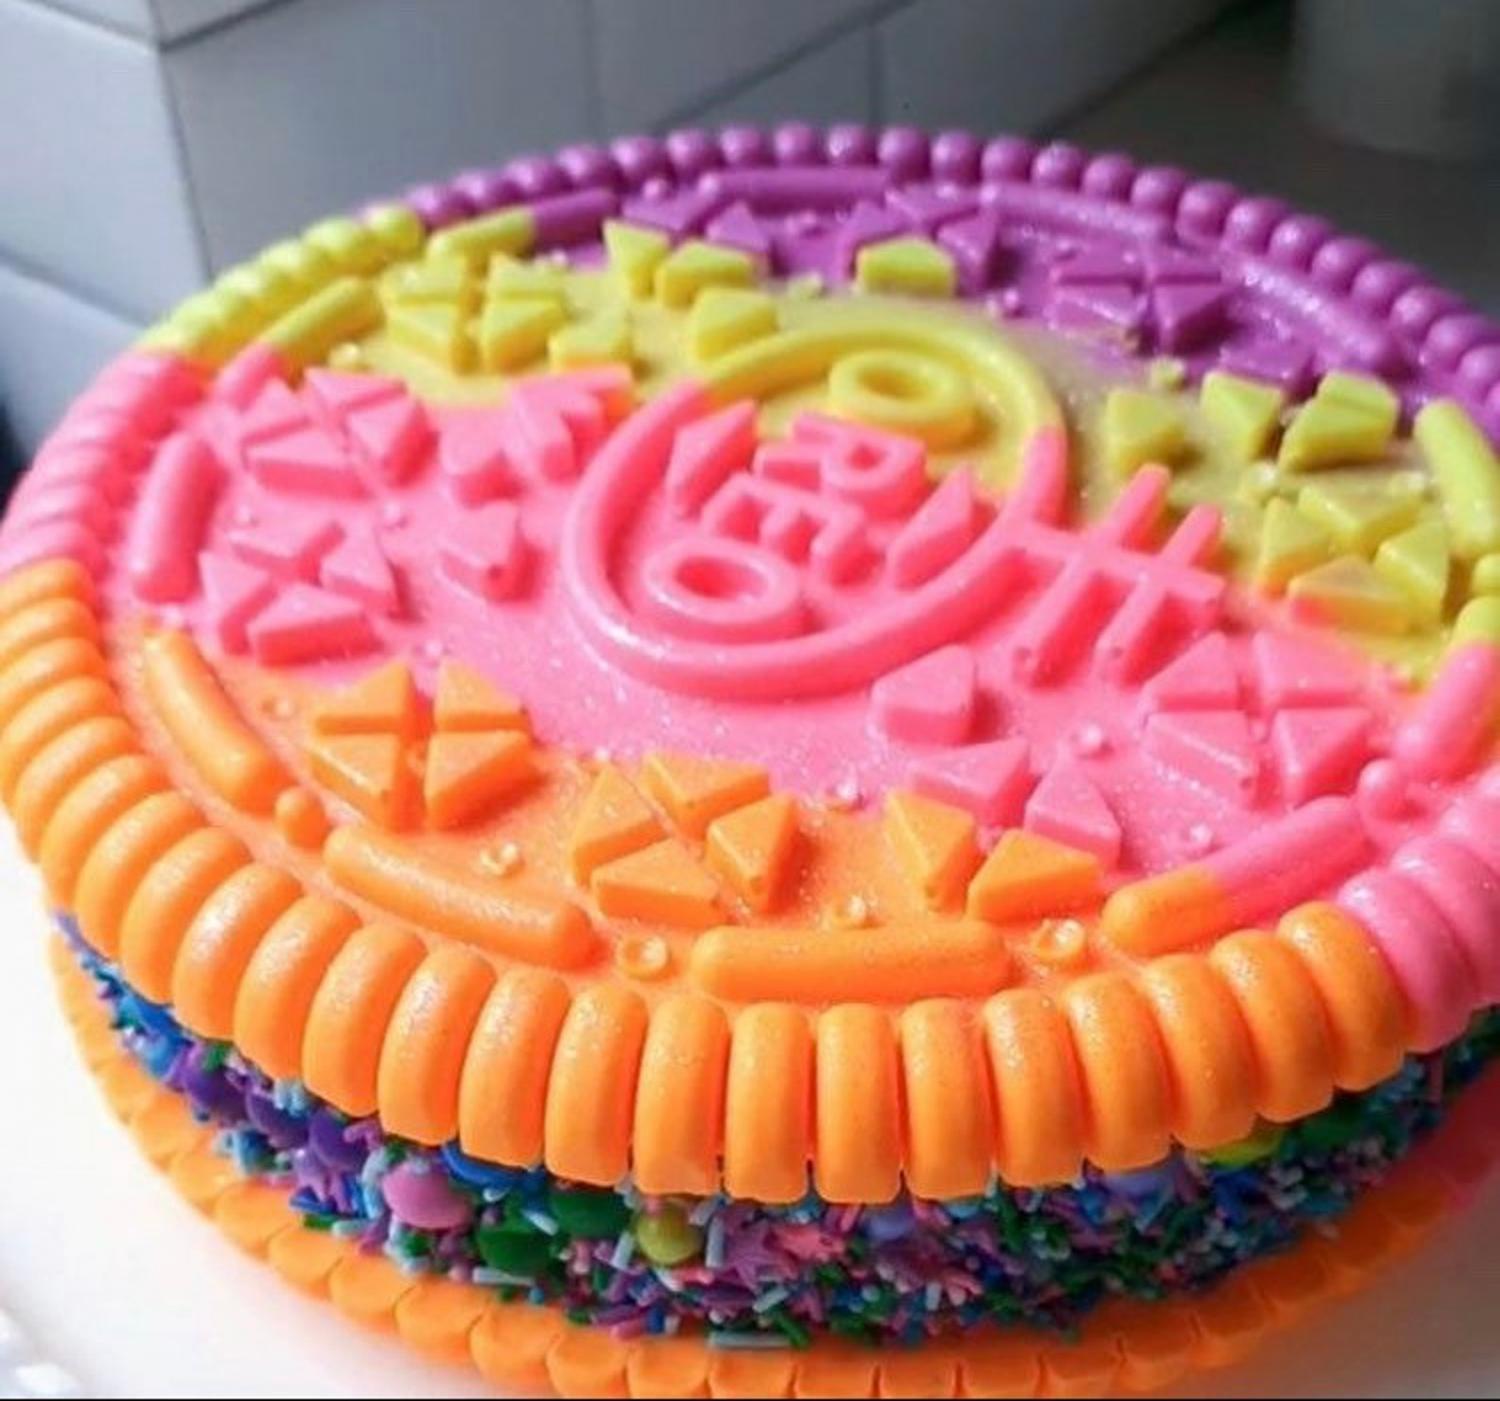 Pink, orange, yellow, and purple colored giant oreo mold cake